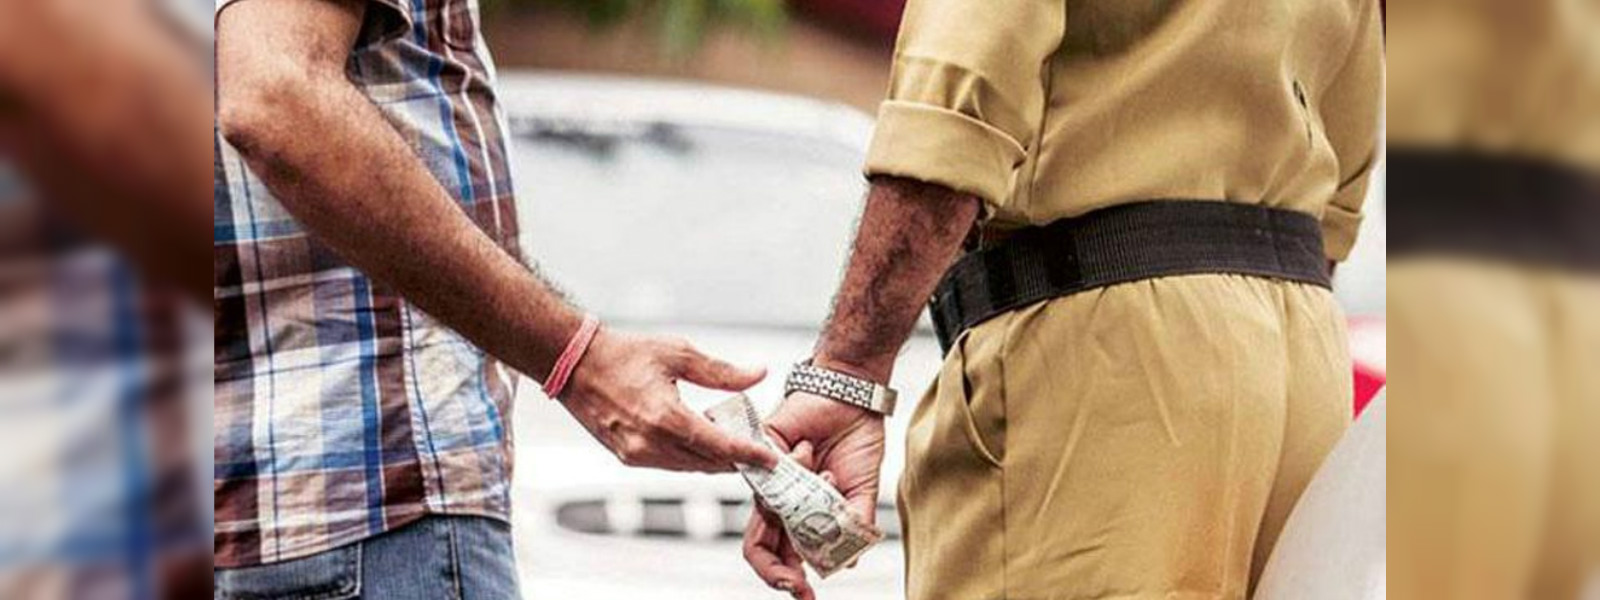 Four years in prison for Rs 5000 bribe